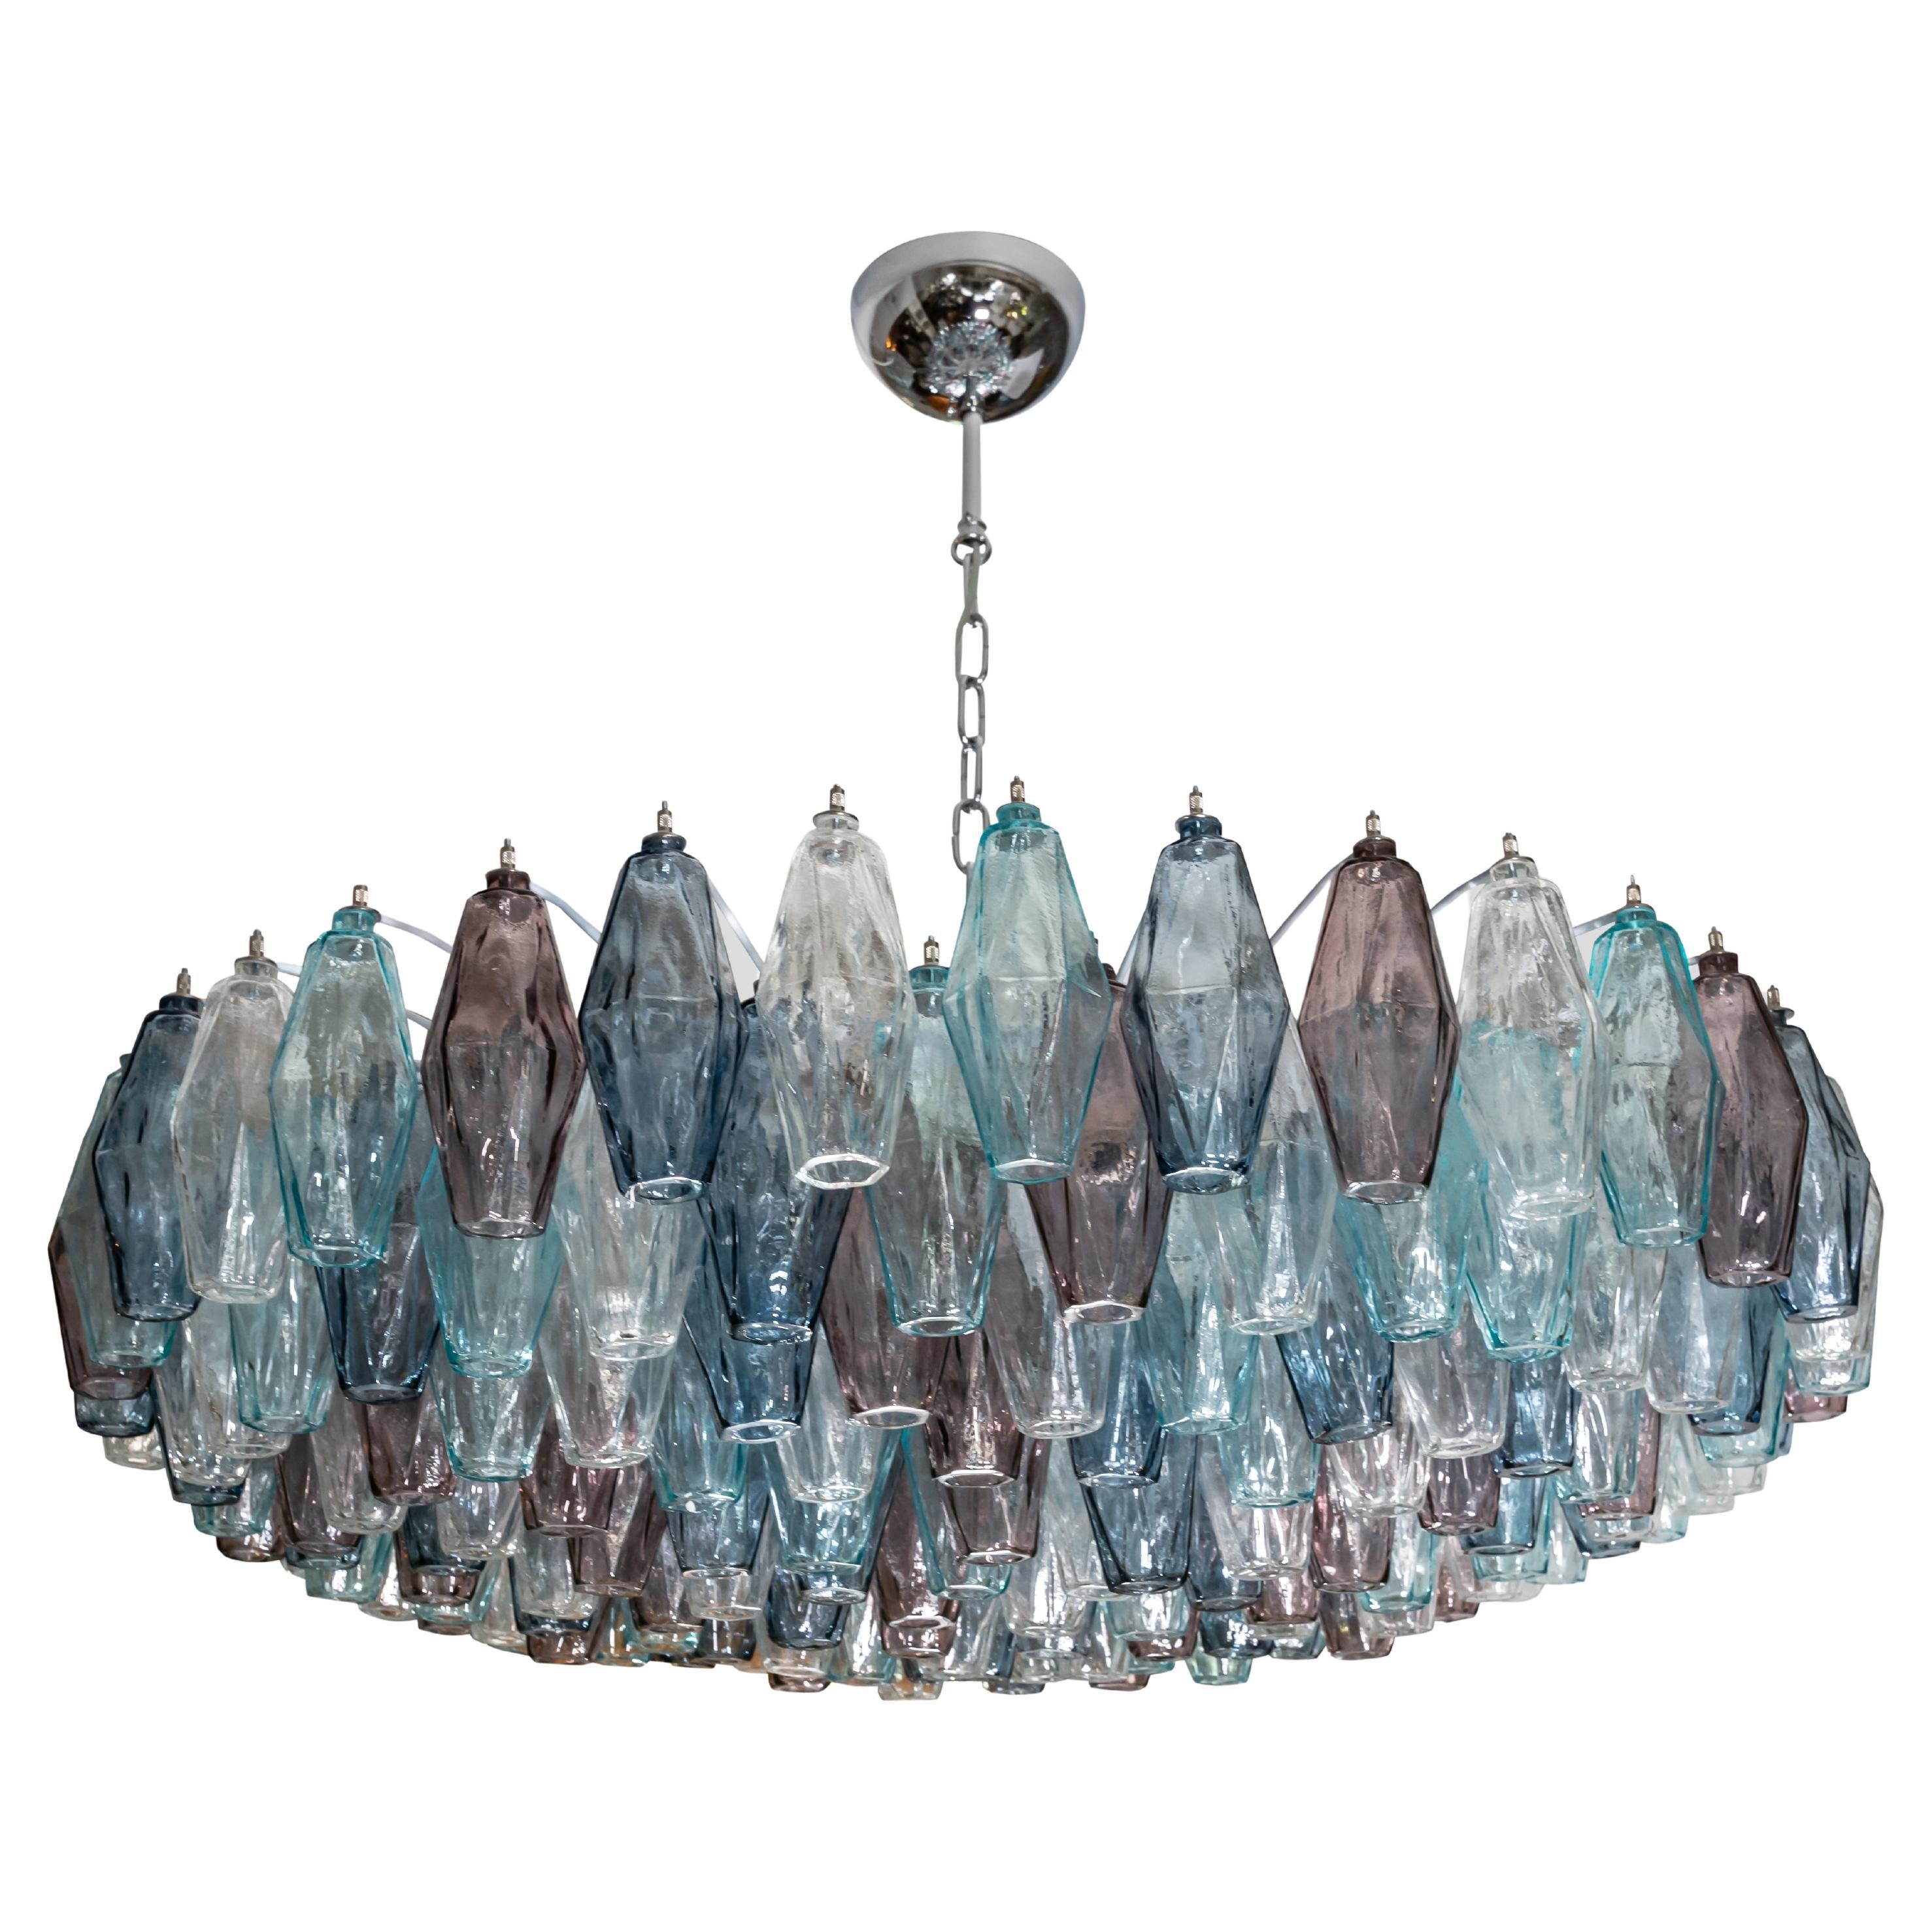 1 Multifaceted Hand Grafted Multi Coloured Murano Glass Ceiling Light Italian